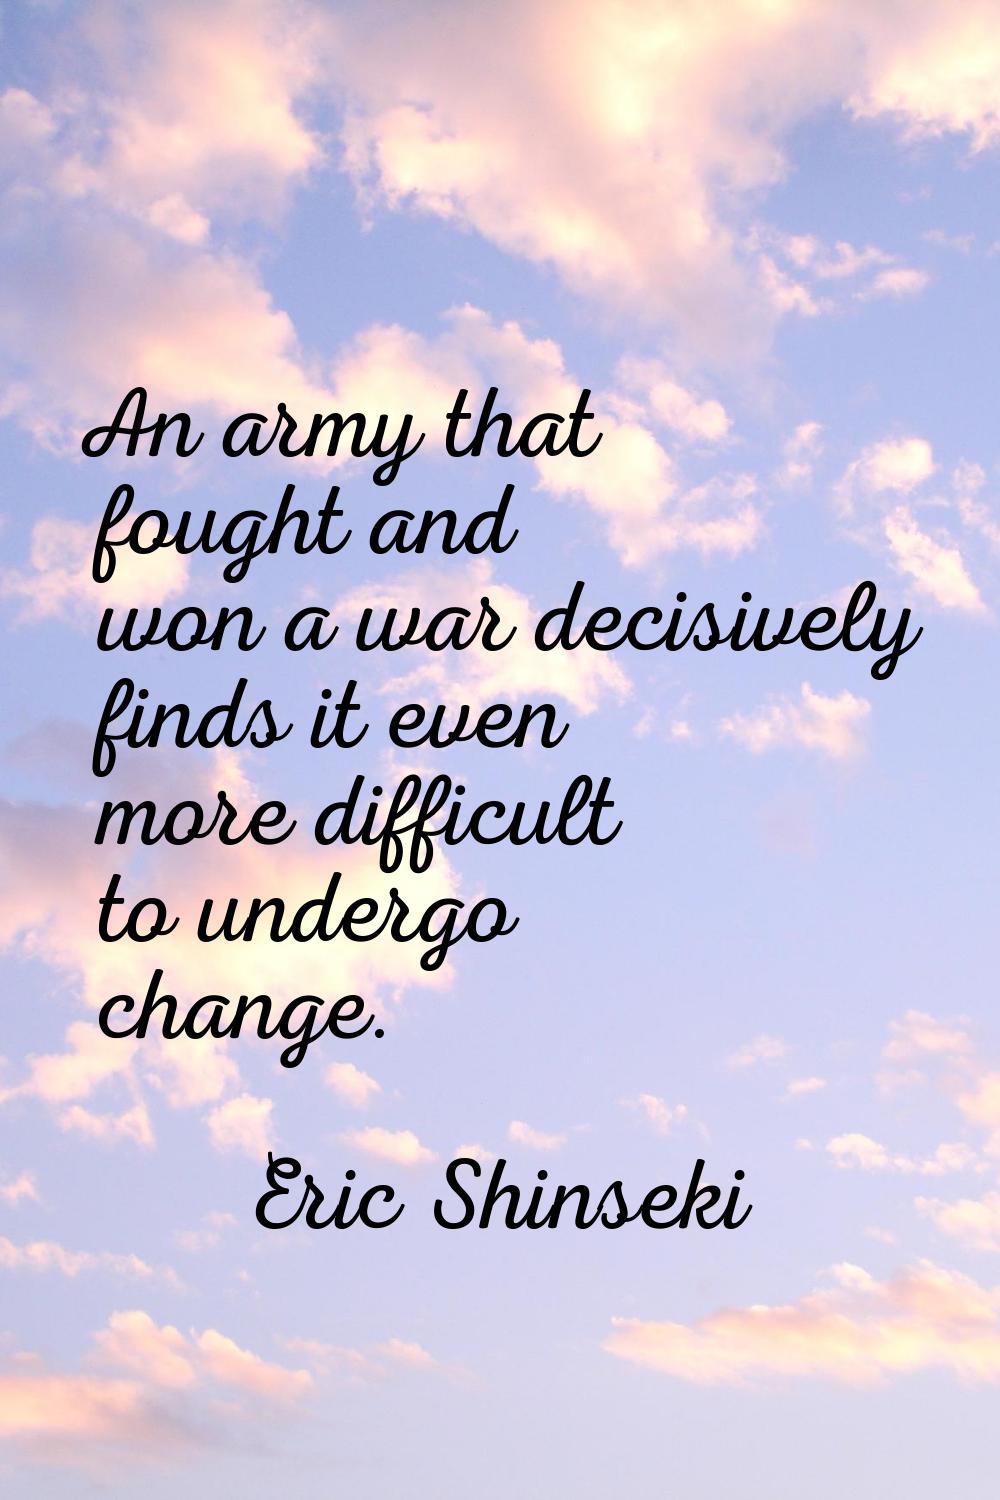 An army that fought and won a war decisively finds it even more difficult to undergo change.